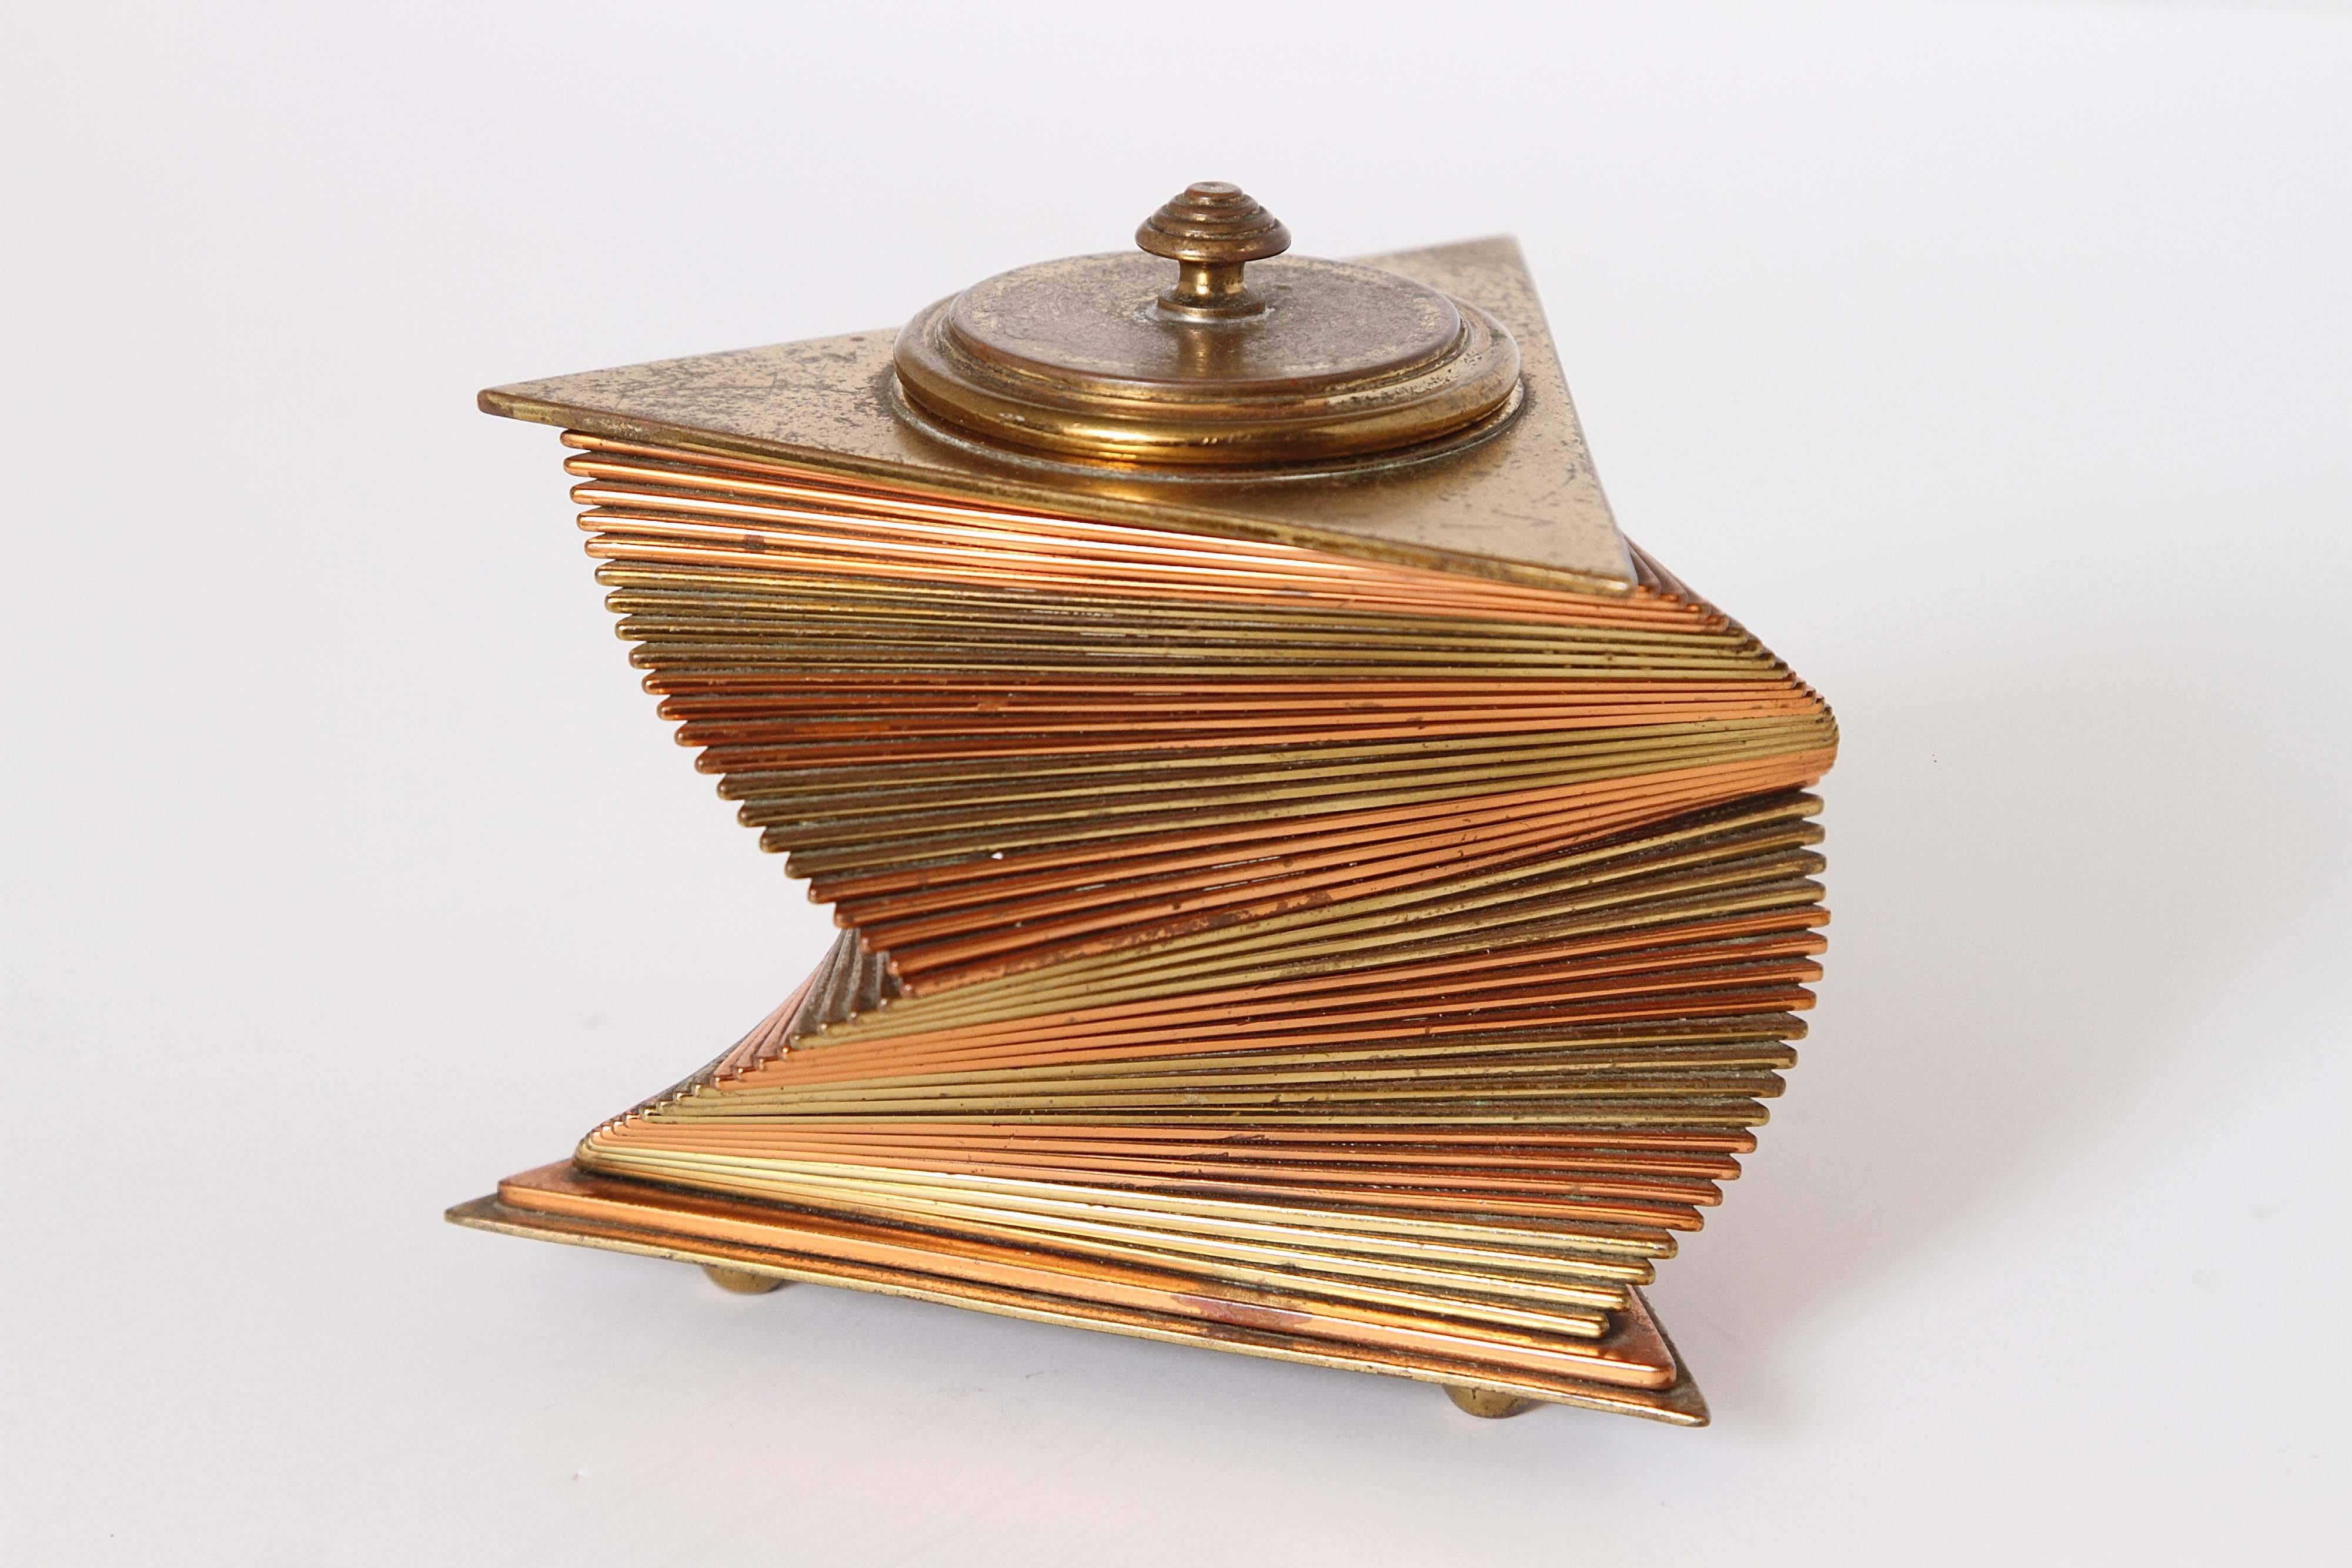 Mid-20th Century Otar Machine Age Art Deco Mixed-Metal Lidded Box, Brass and Copper